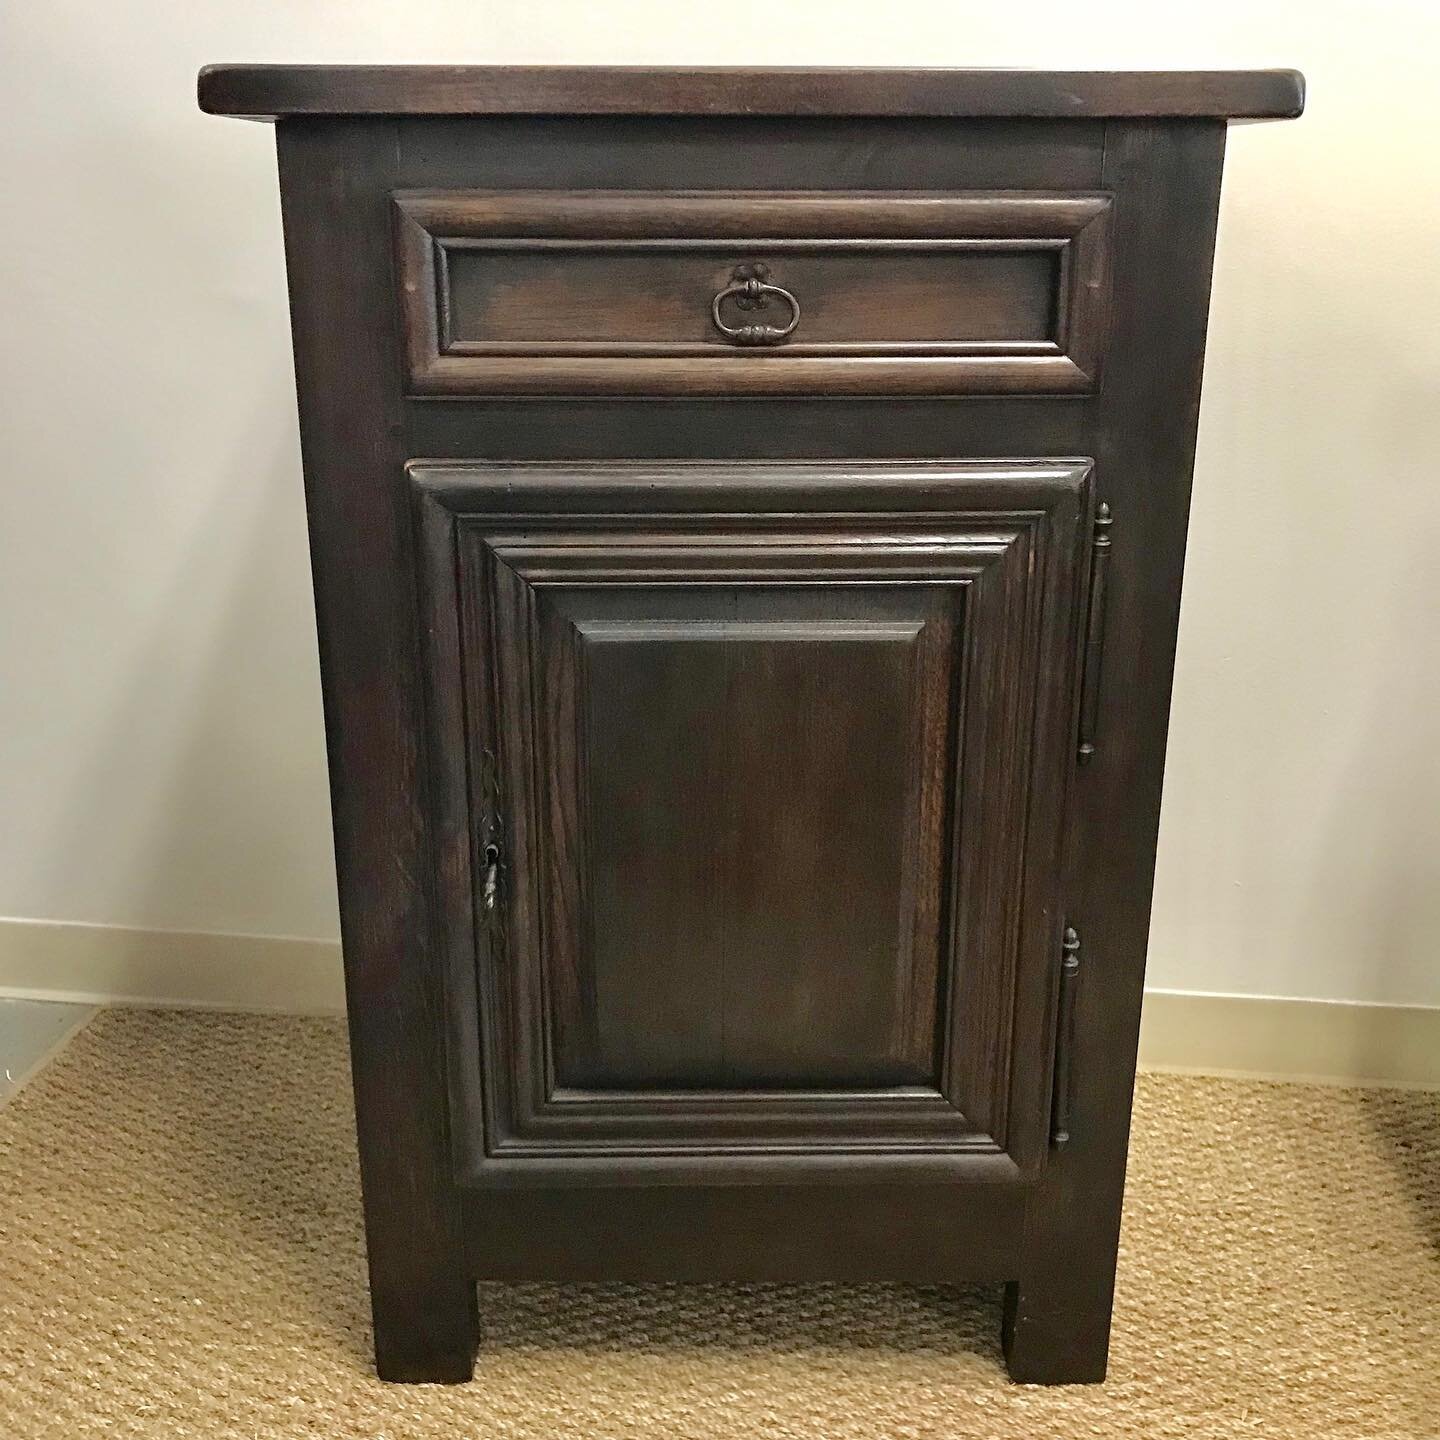 Happy Fall! TAG SALE-Antique French One-Door Cabinet. Stop by to see this and more furniture and accessories in our Tag Sale Booth @westendaugusta Dm, text or call 706-830-9641 for further info. Open until 6. #antiques #tagsale #antiquedealersofinsta